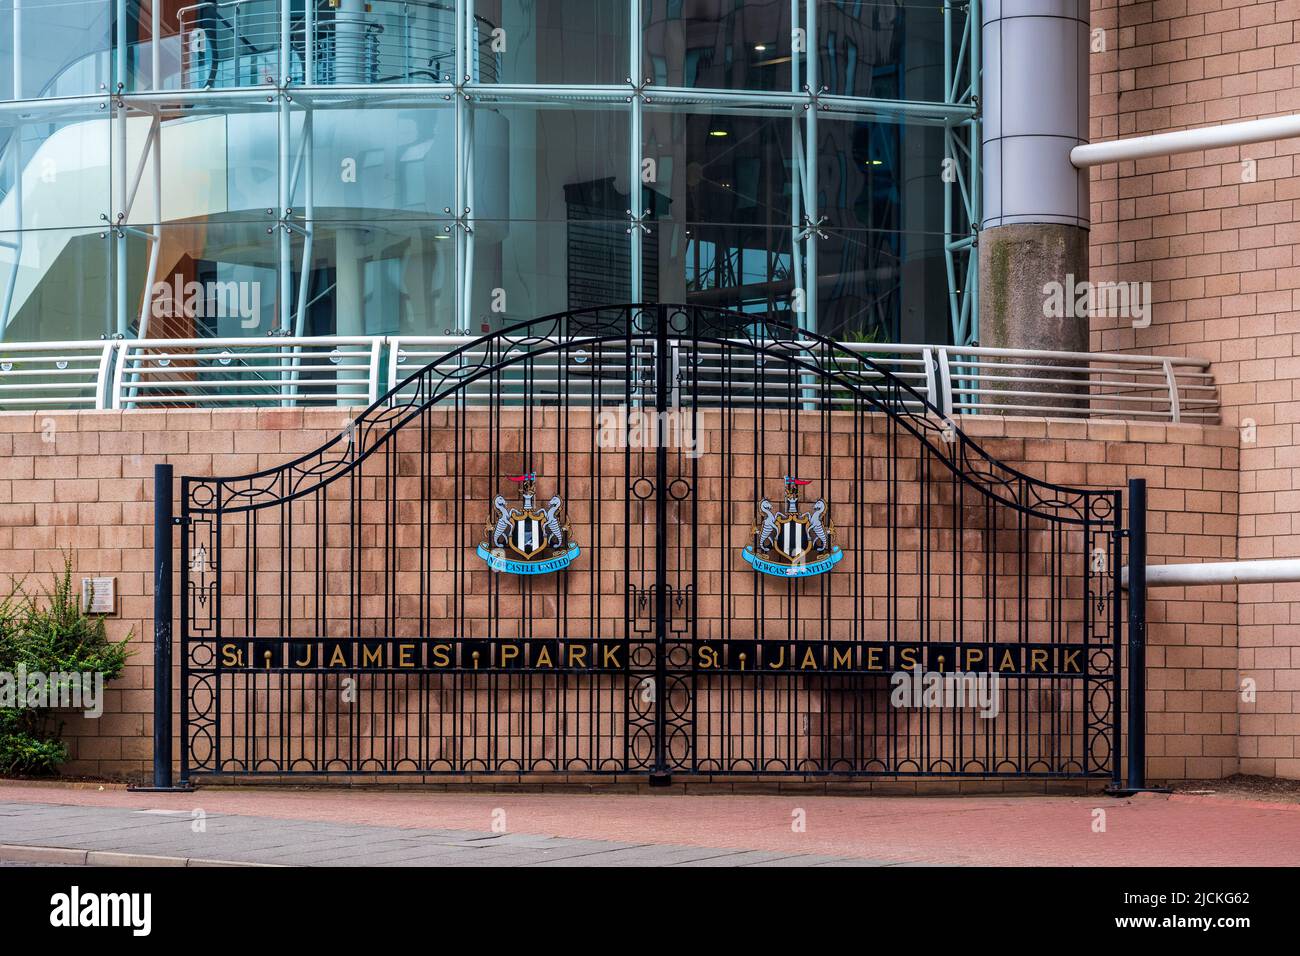 St James' Park Newcastle, home of Newcastle United football team. Historic St James Park Gallowgate End gates relocated 2013 following redevelopment. Stock Photo